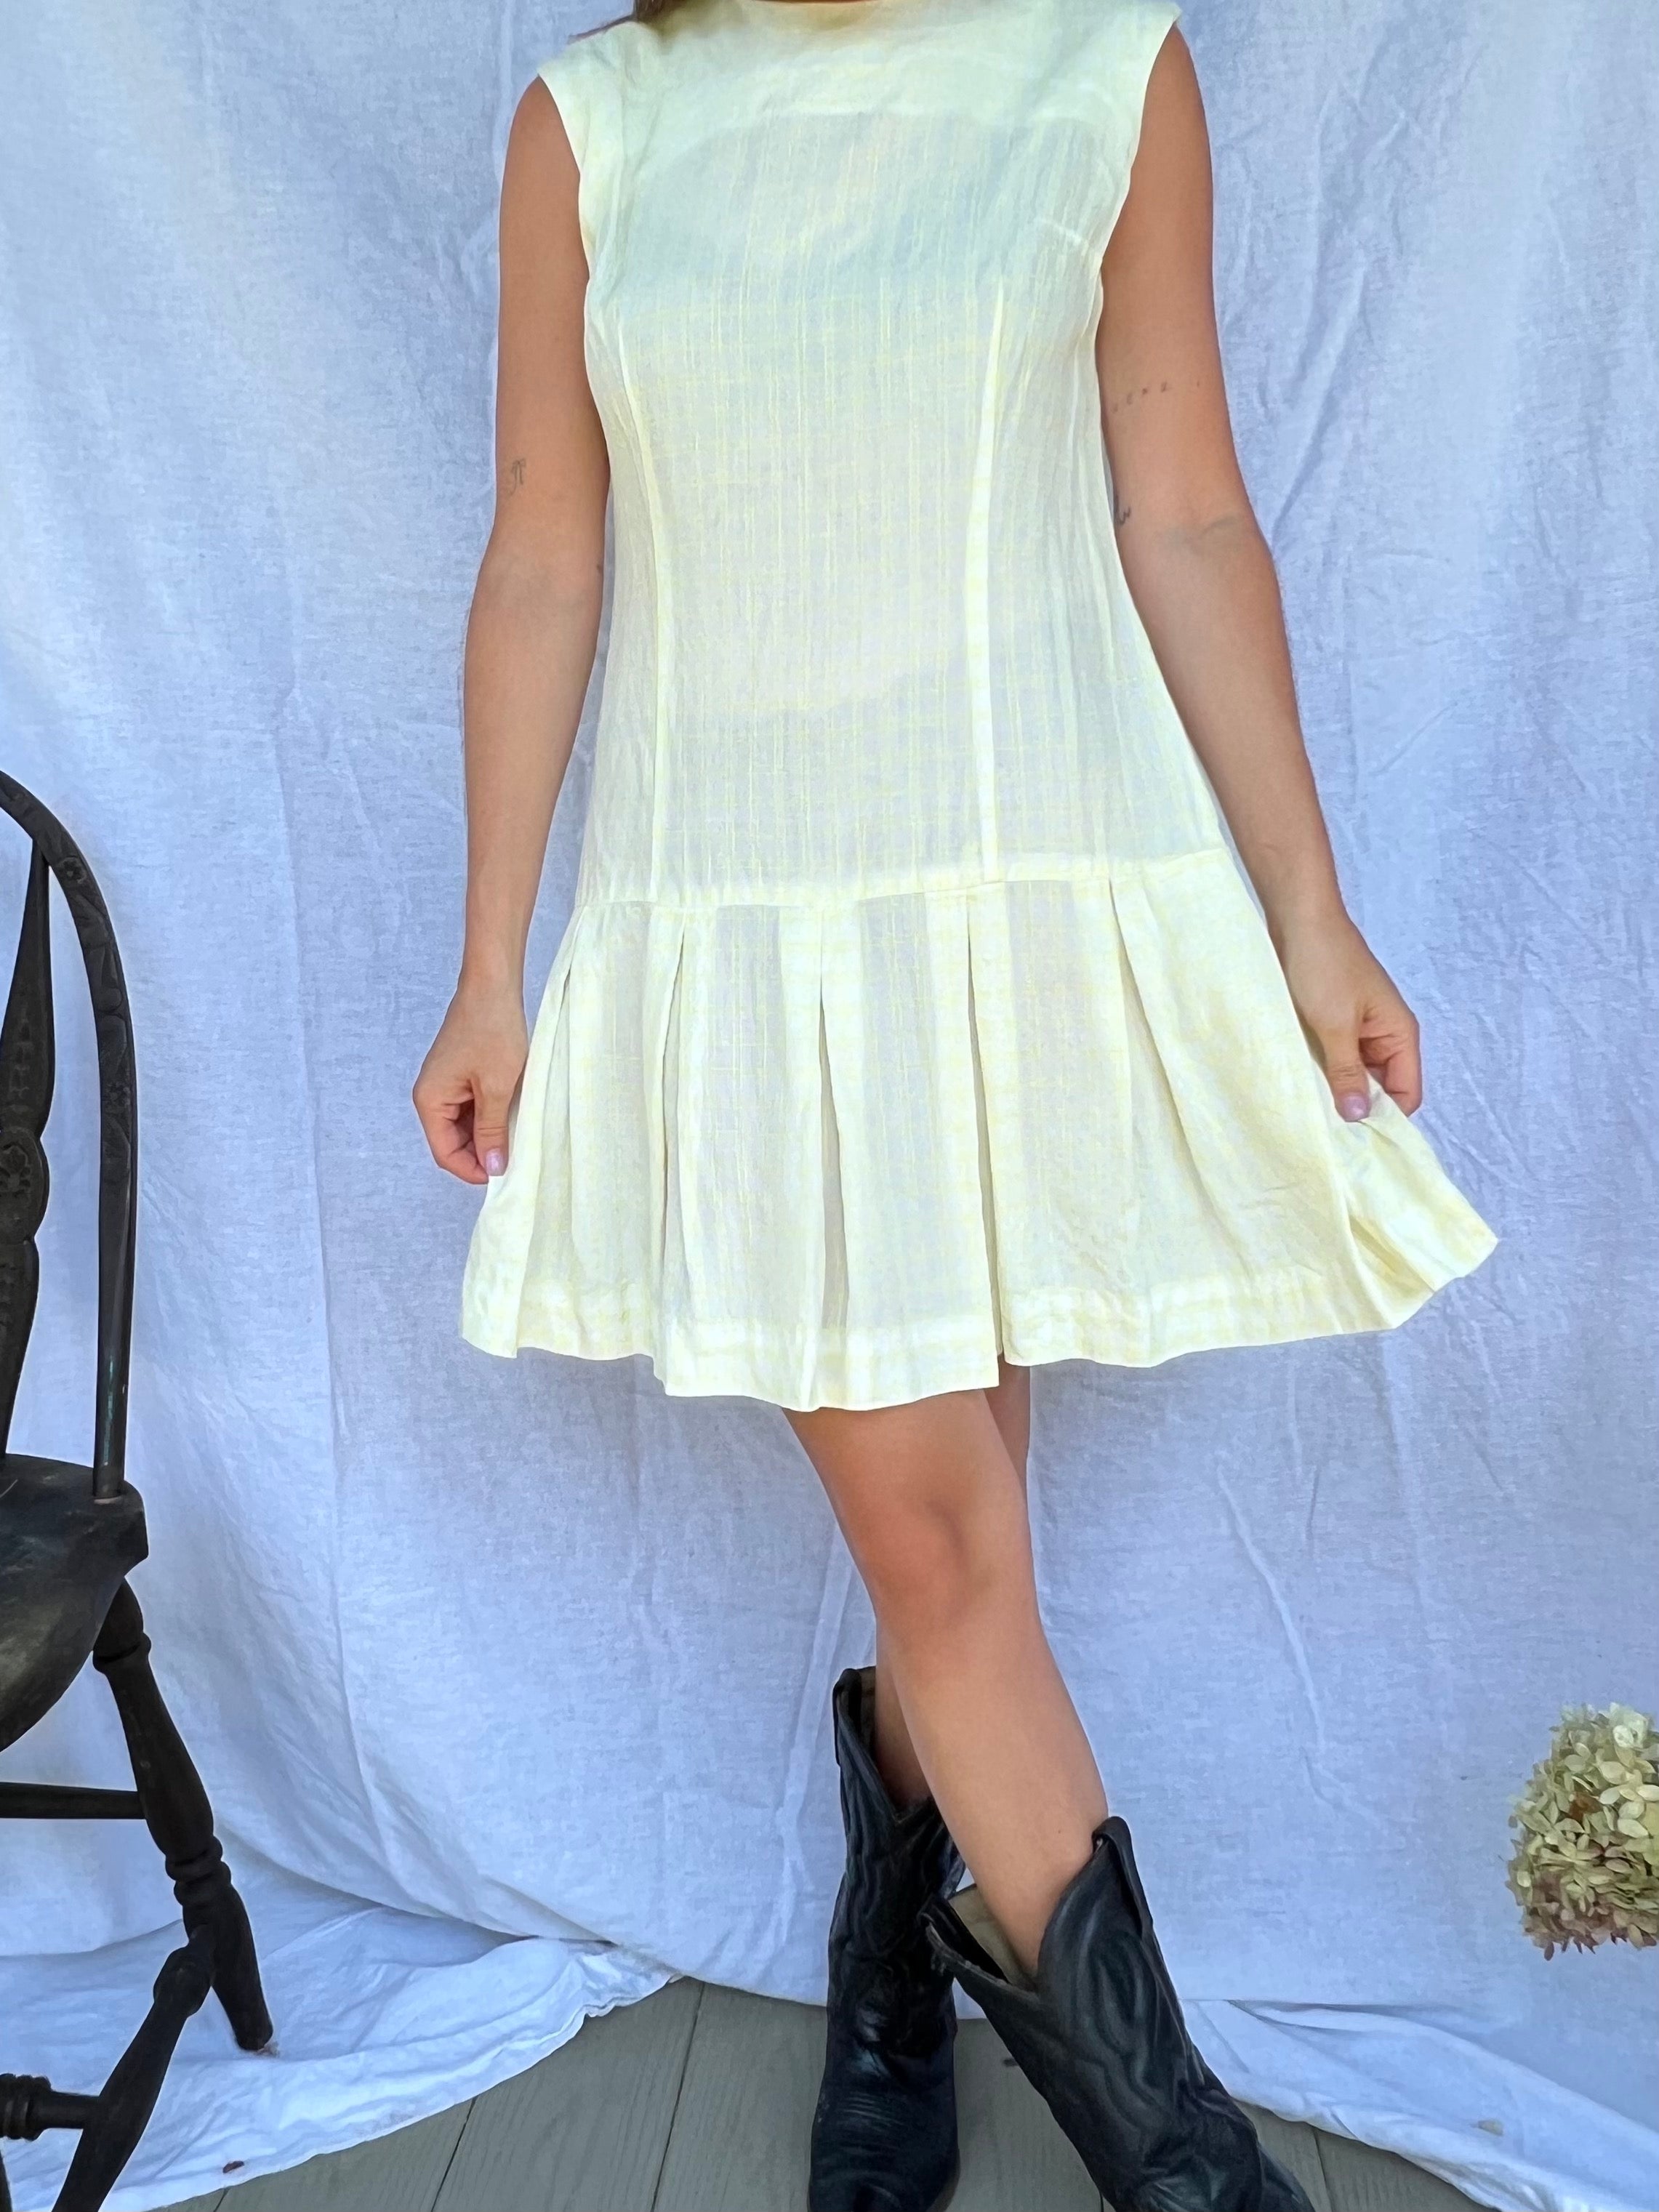 Pleated Yellow and White Dress